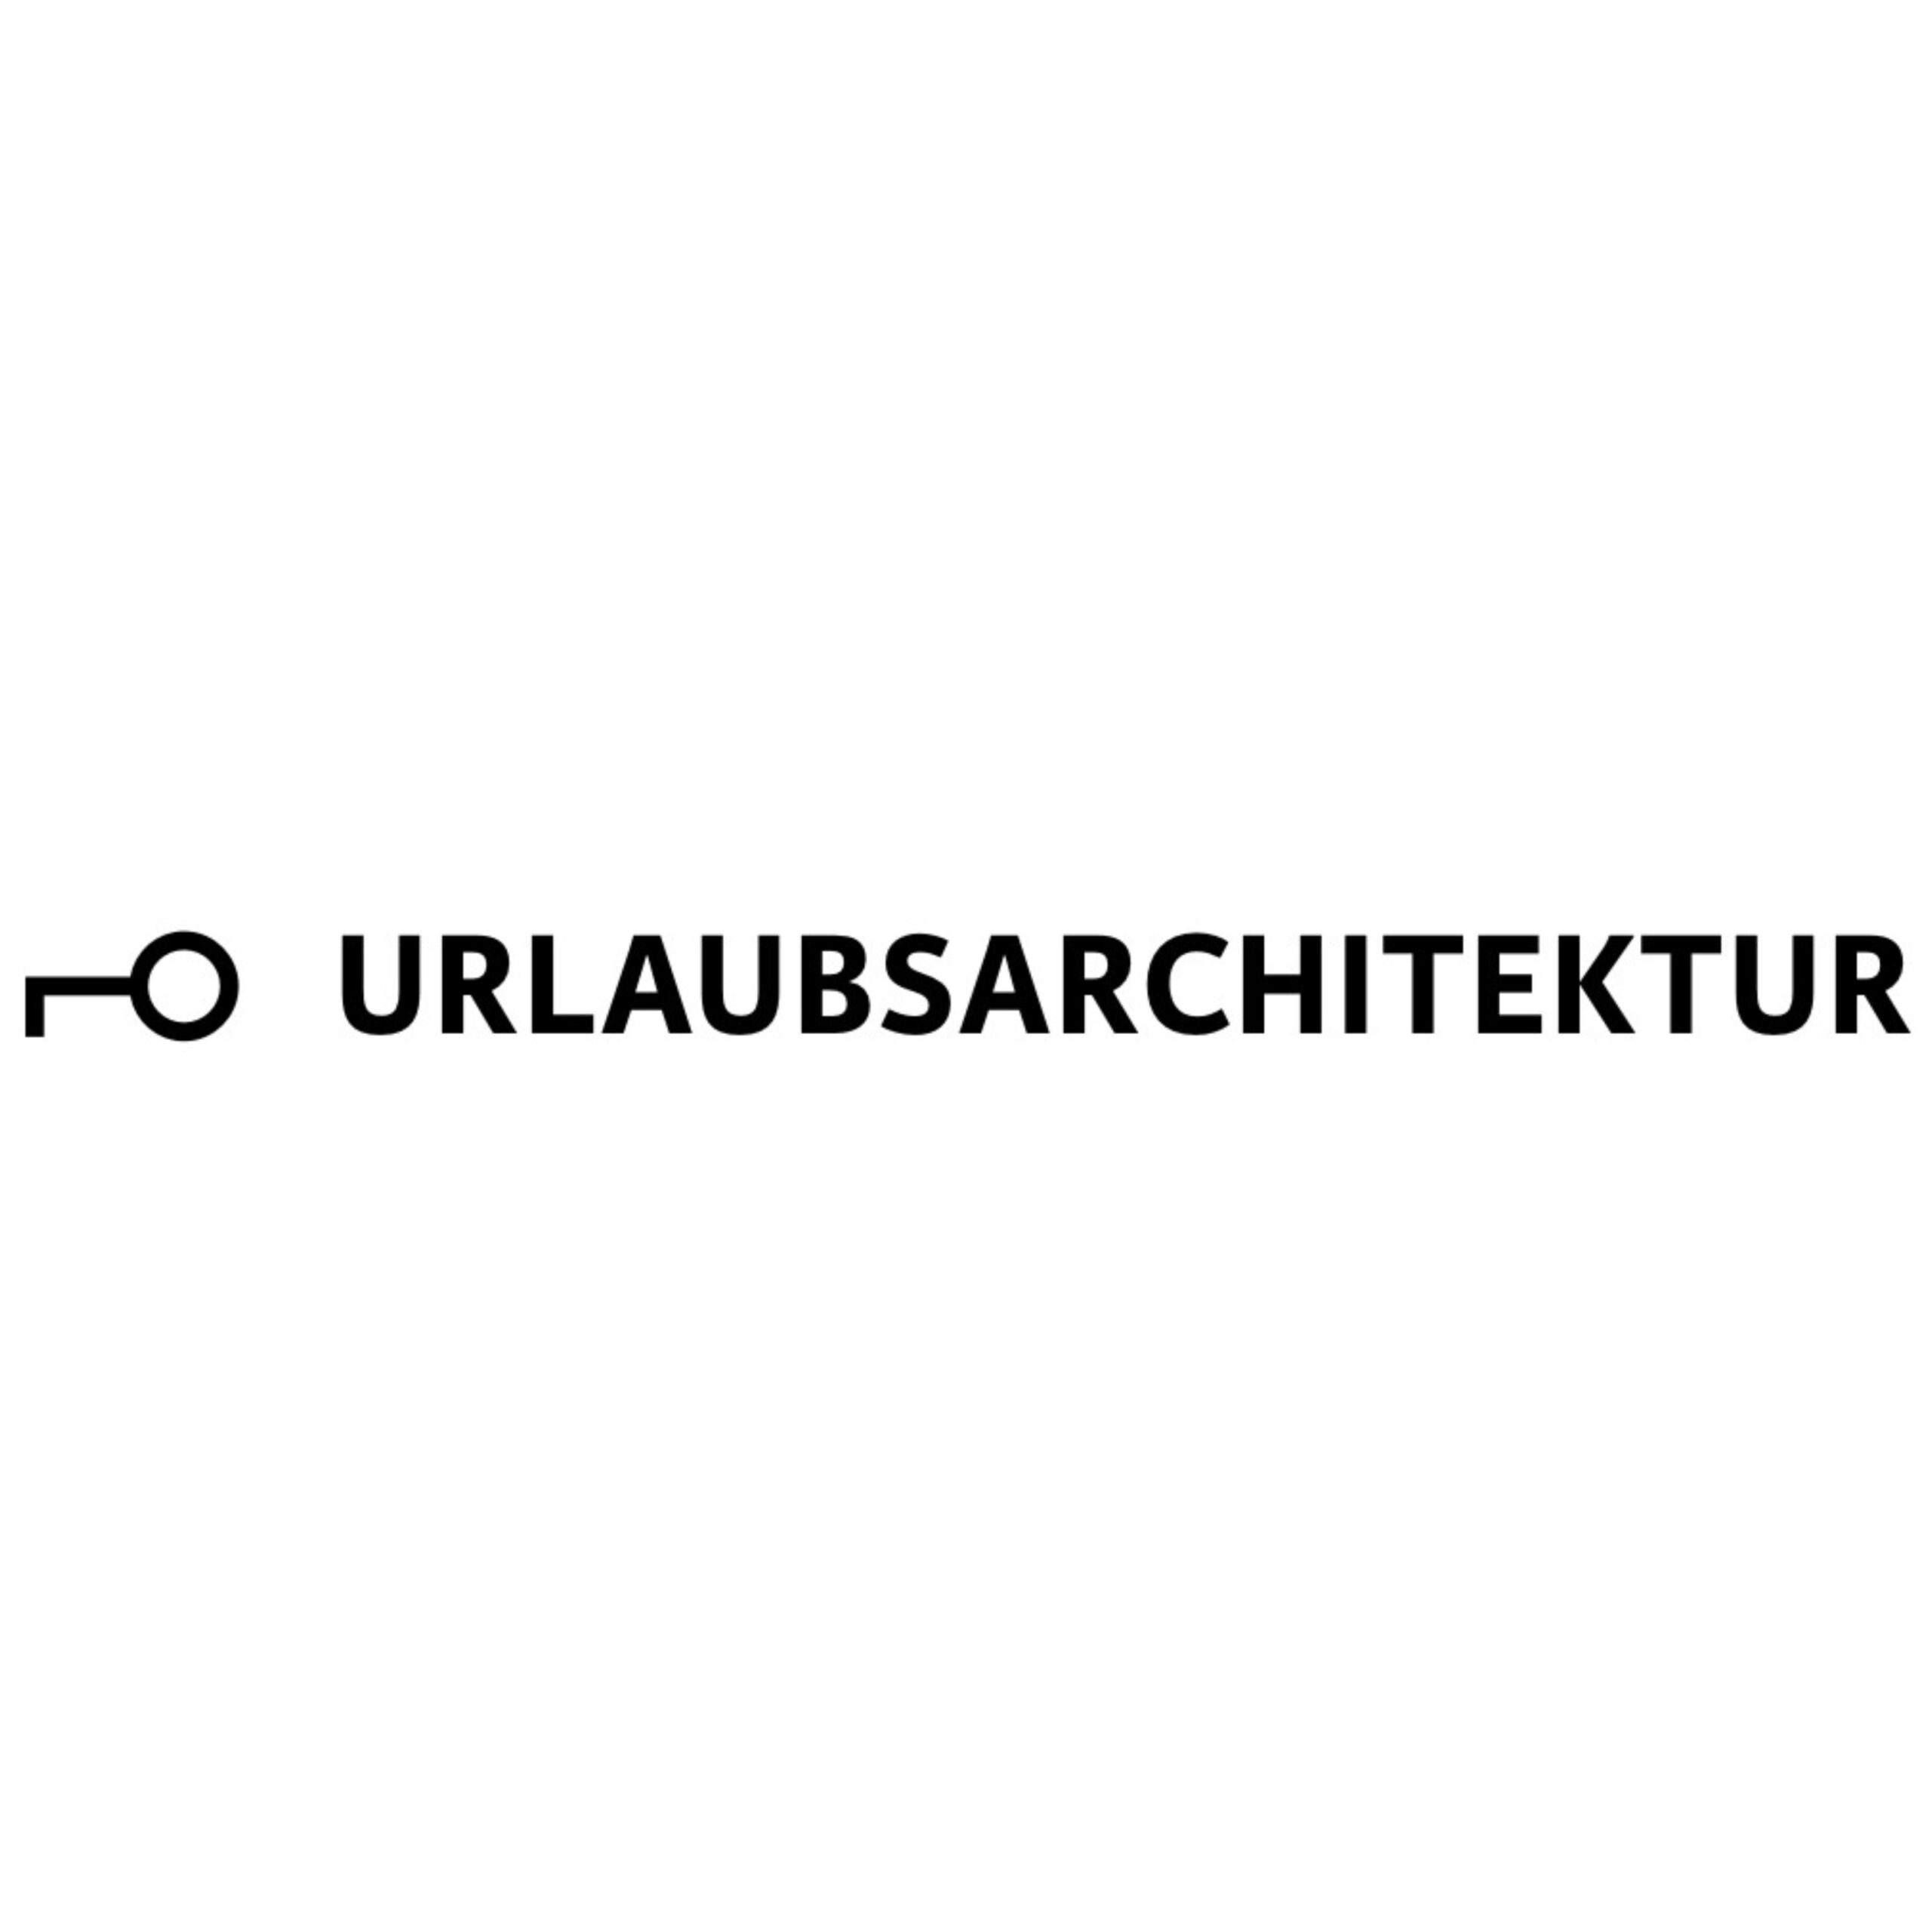 You are currently viewing URLAUBSARCHITEKTUR